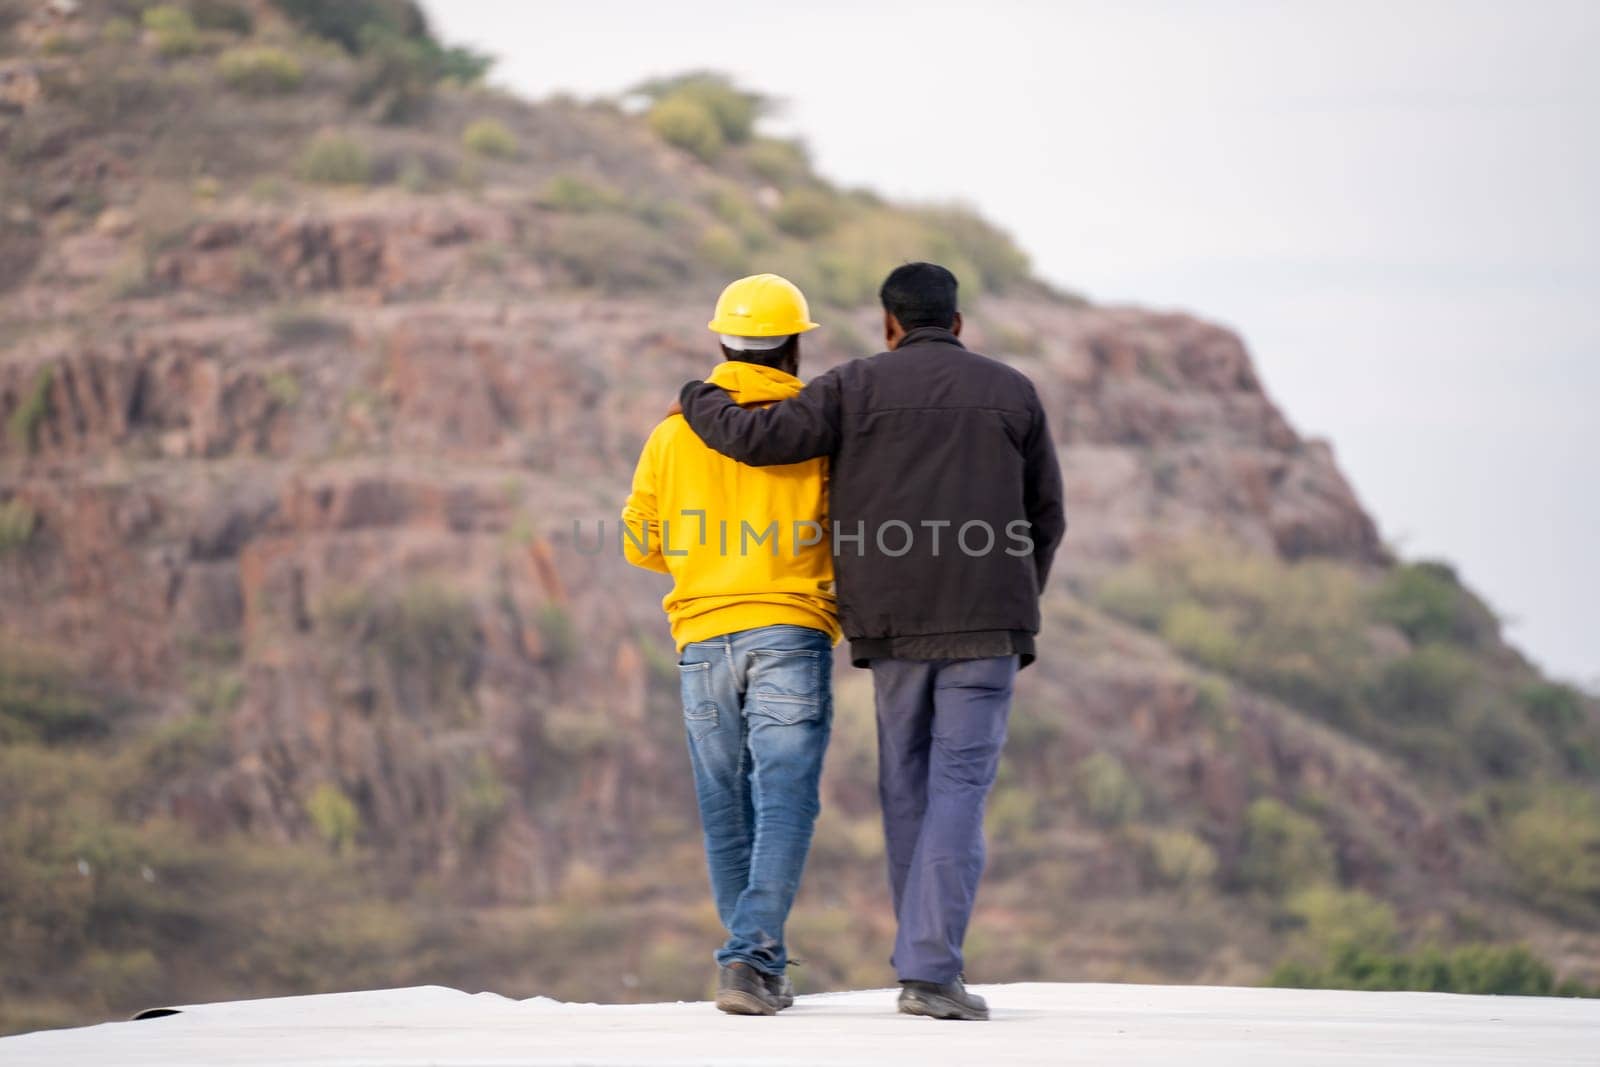 Man friends talking to person with construction hat helmet and visibility clothing showing mountain to build through by Shalinimathur